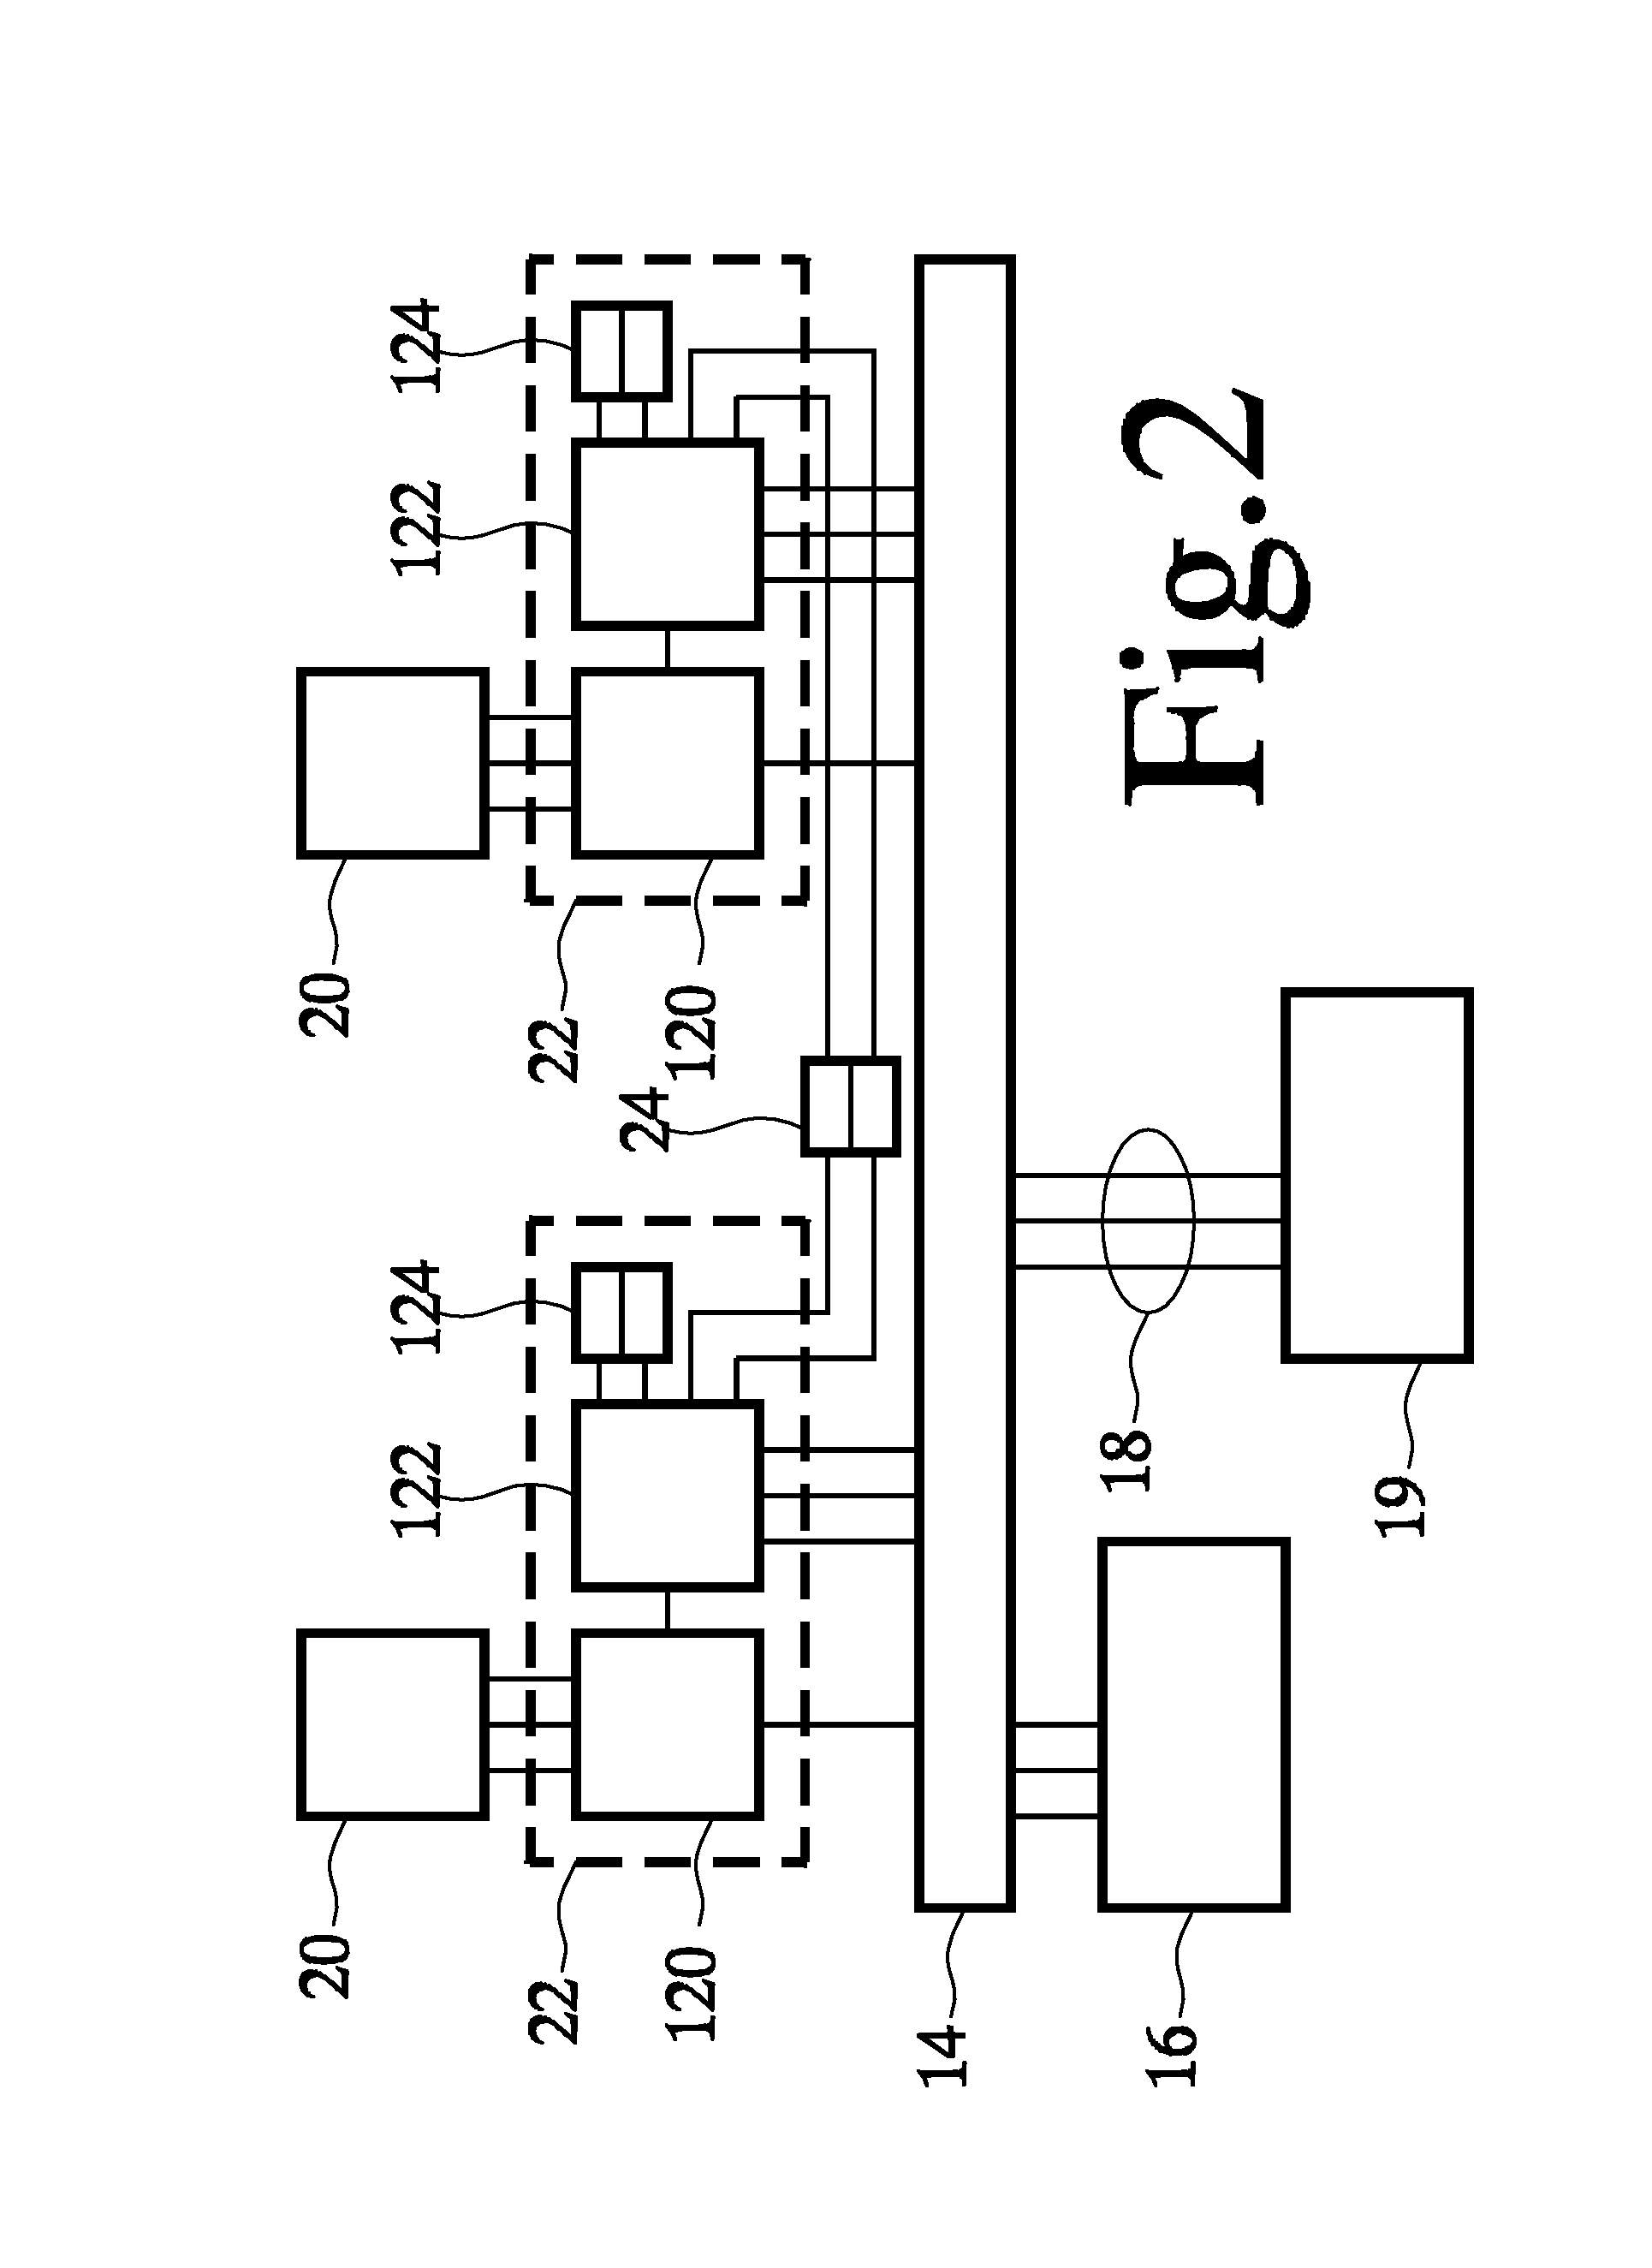 Data processing circuit with cache and interface for a detachable device